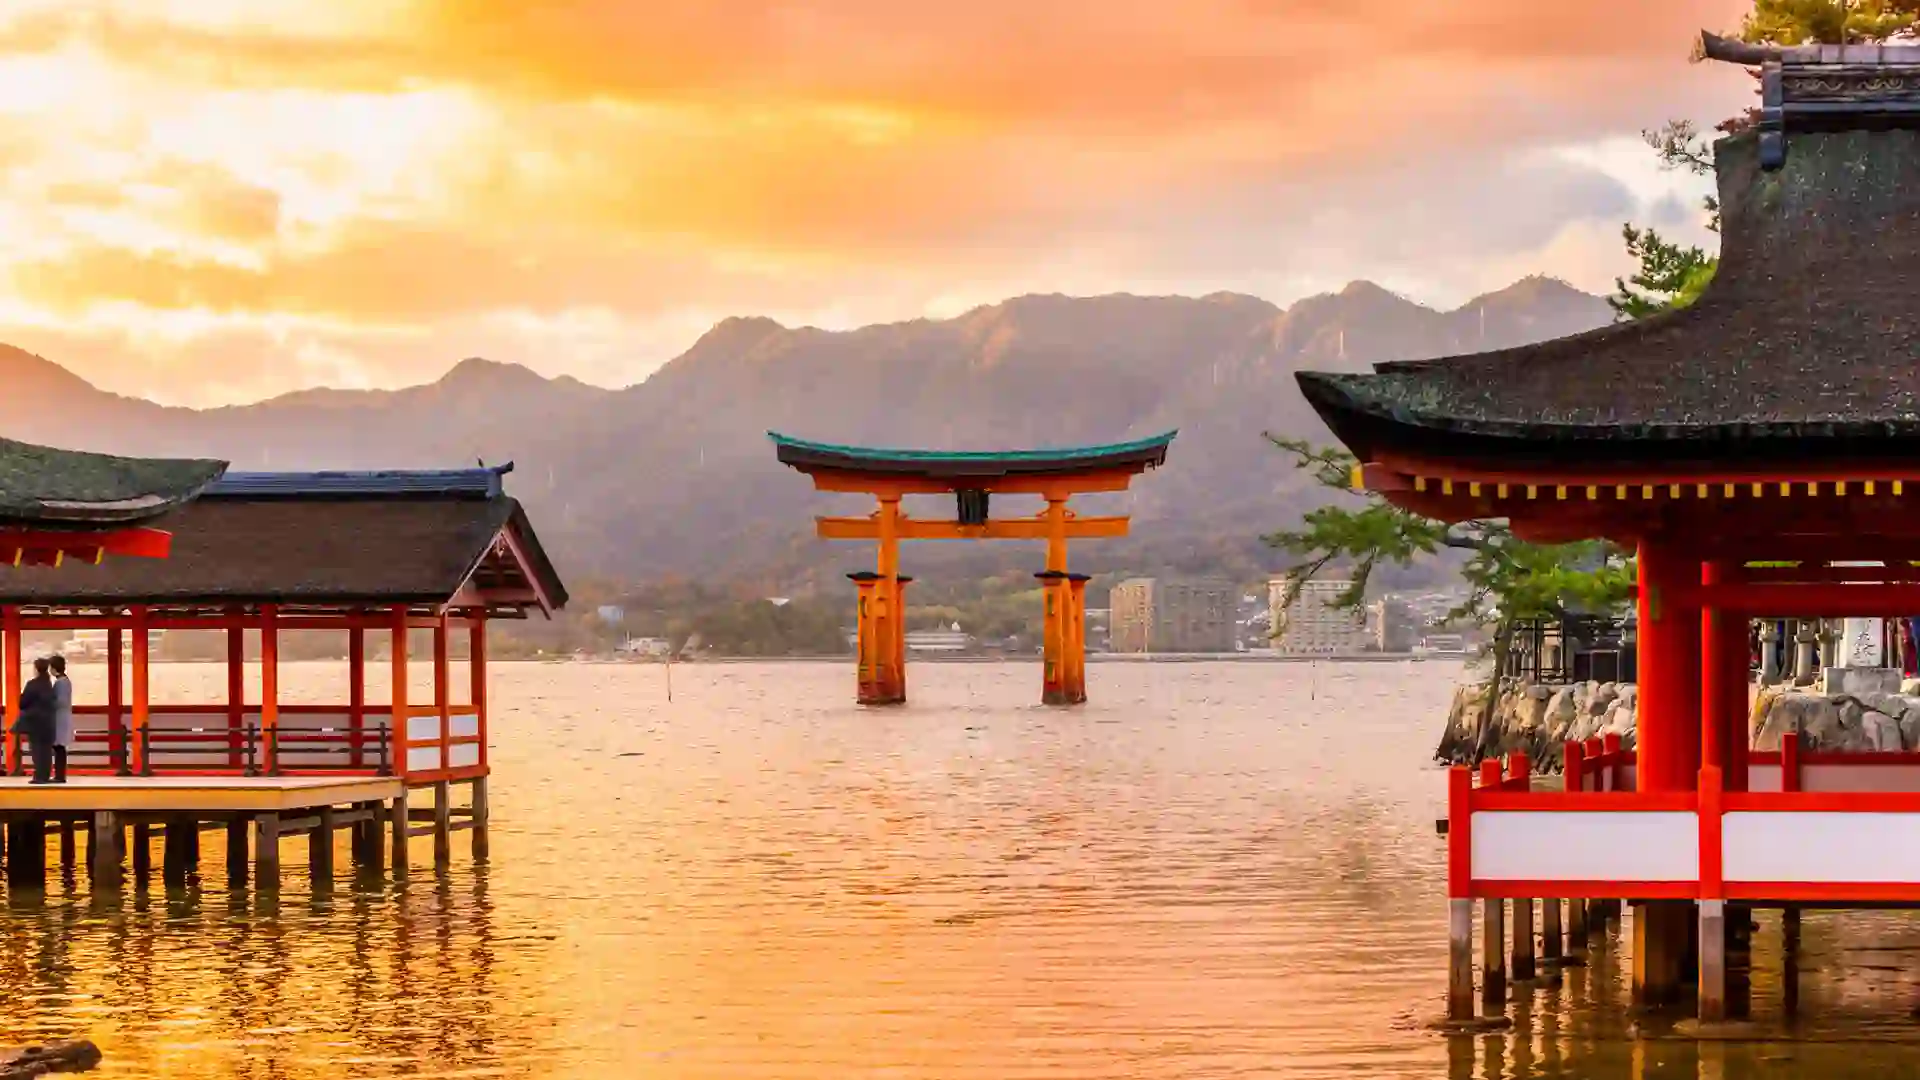 Gate landmark in water with mountains and sunset in background.